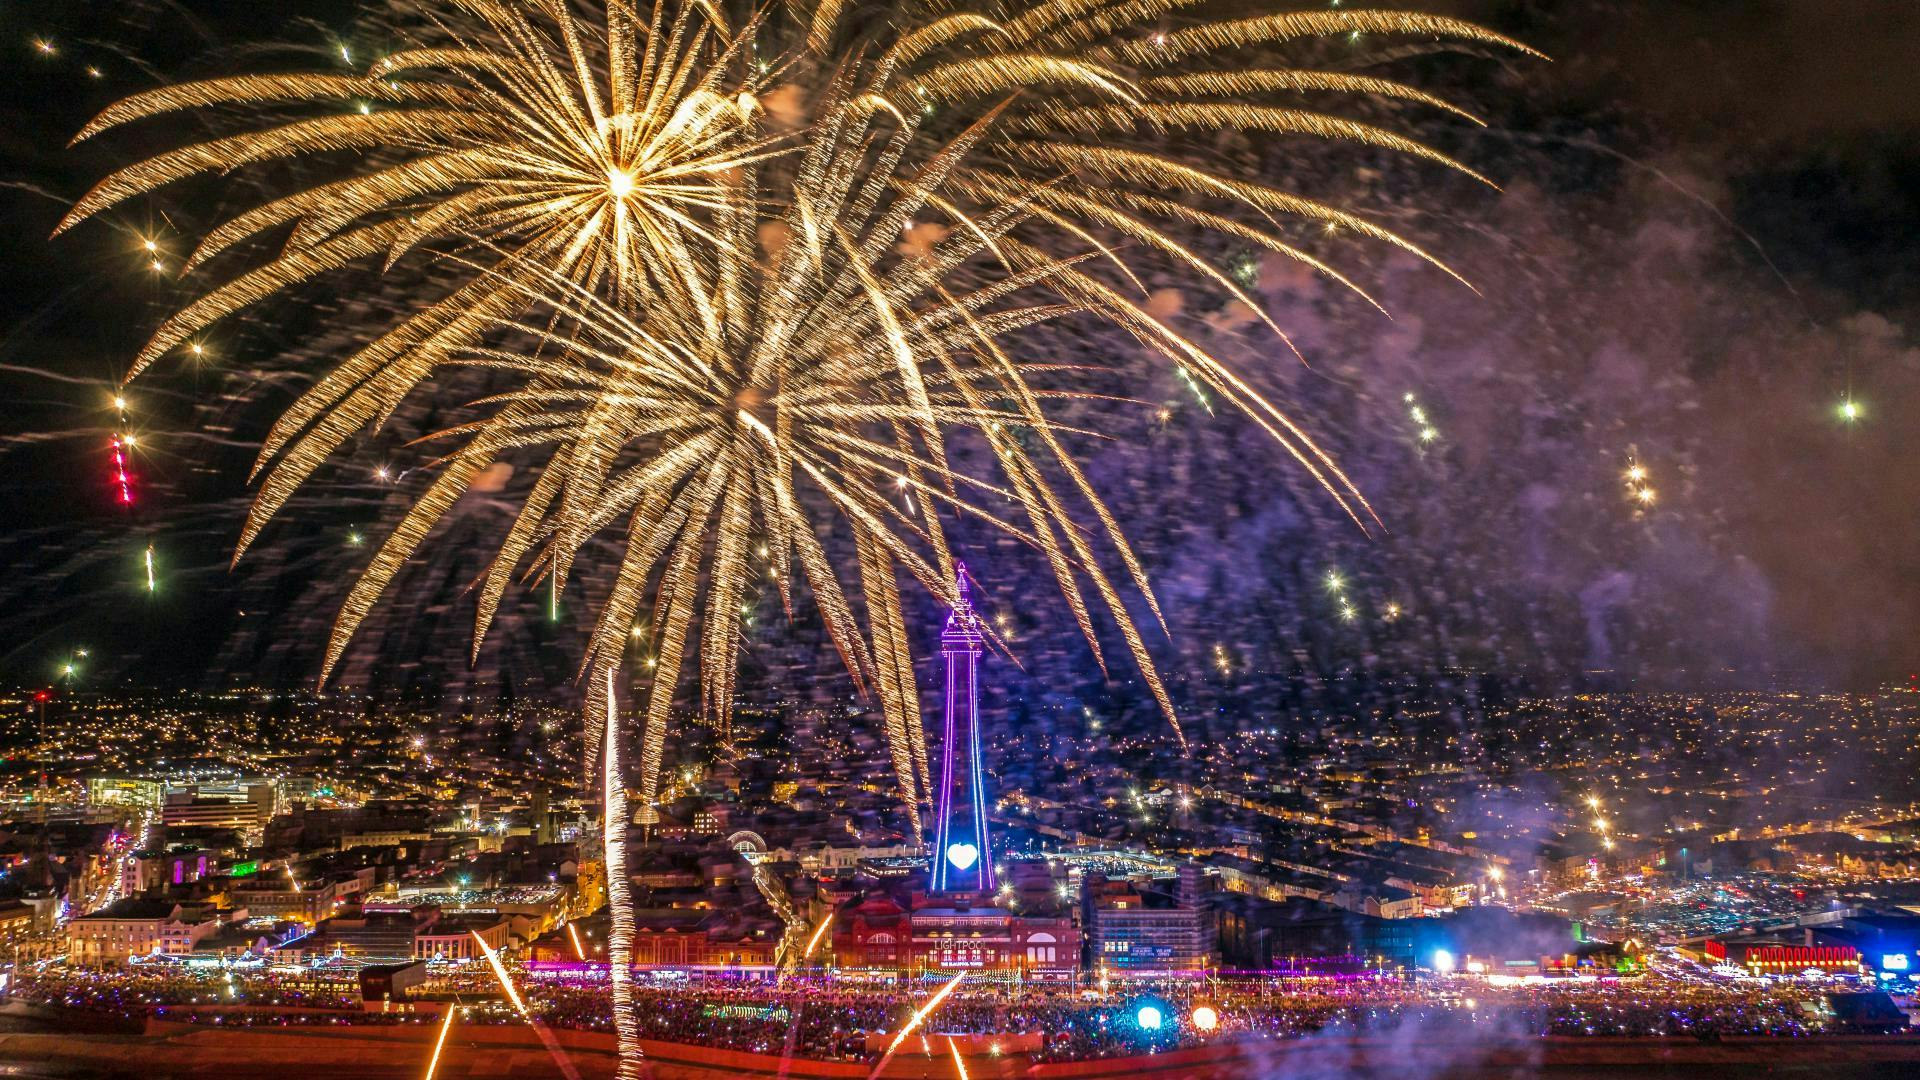 image of a fireworks display in Blackpool with the Blackpool Tower in the background